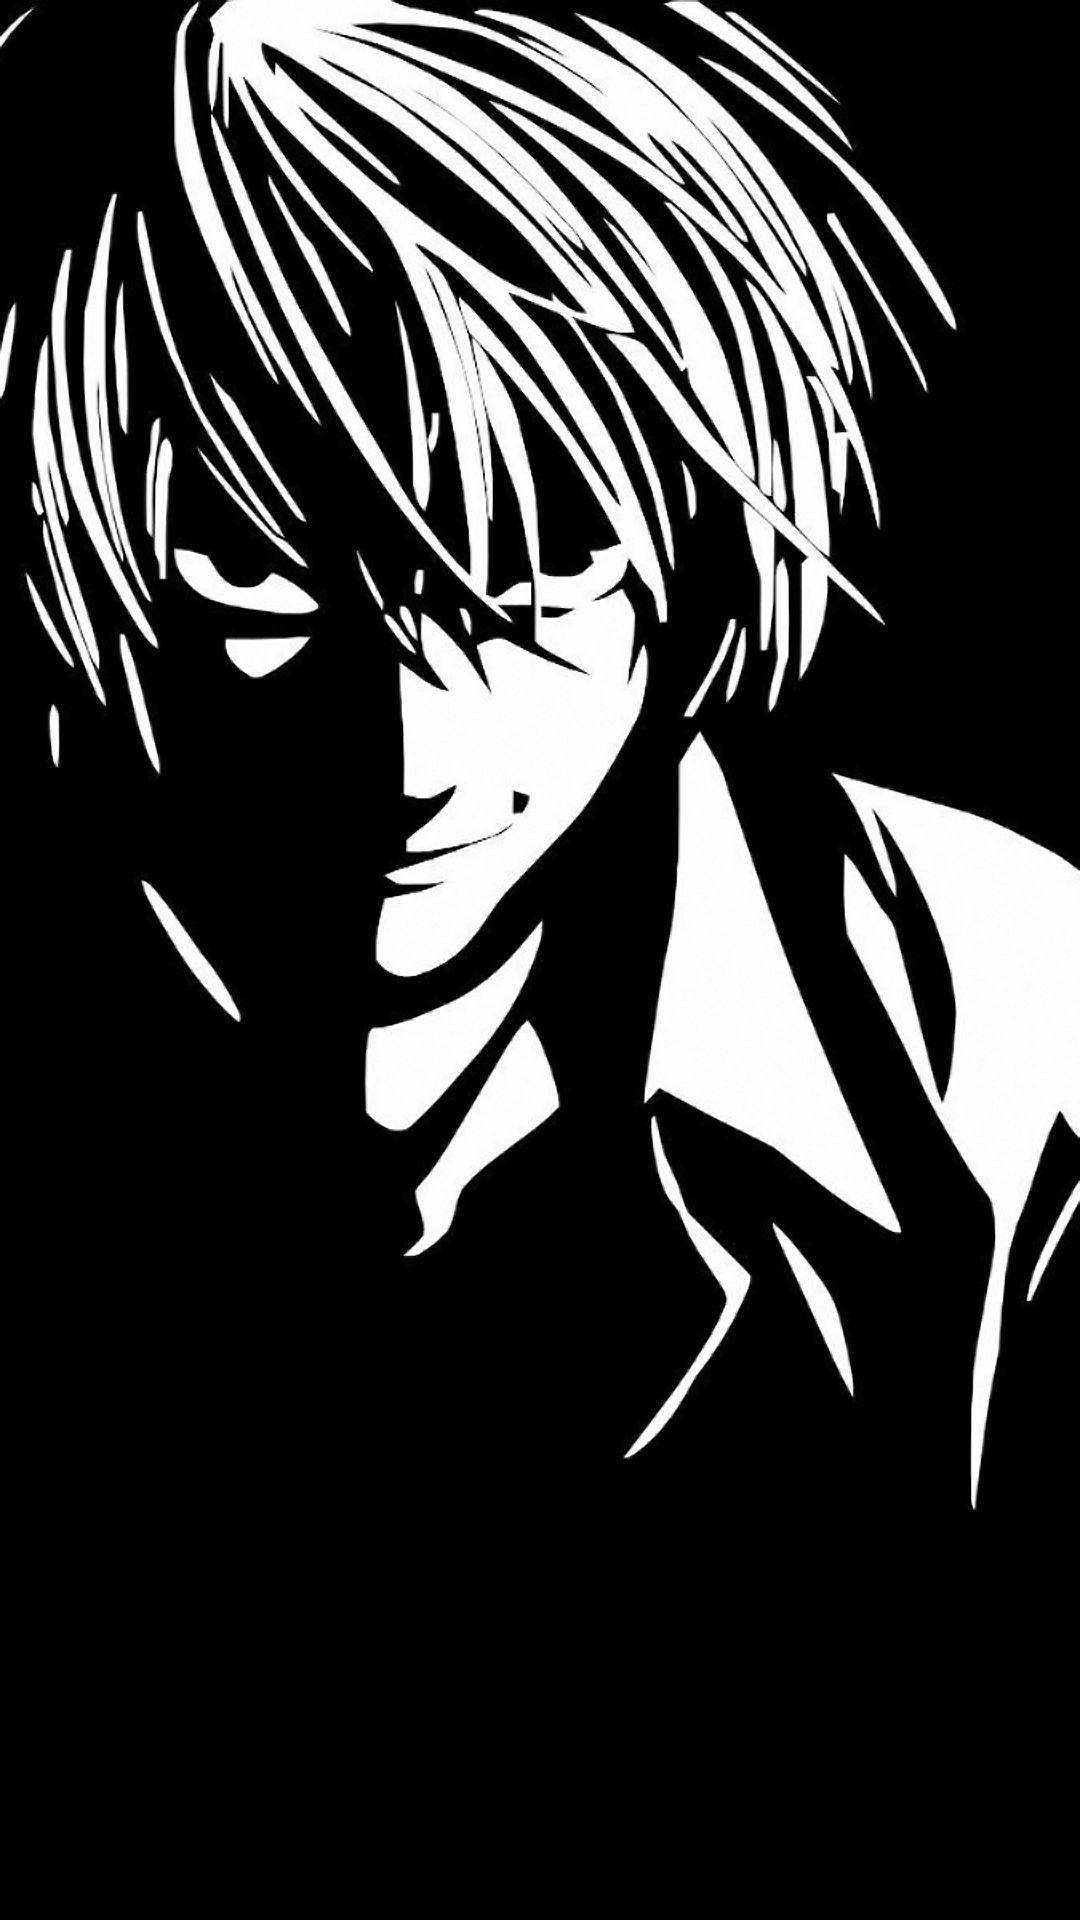 Apple Death Note Phone Wallpapers Top Free Apple Death Note Phone Backgrounds Wallpaperaccess